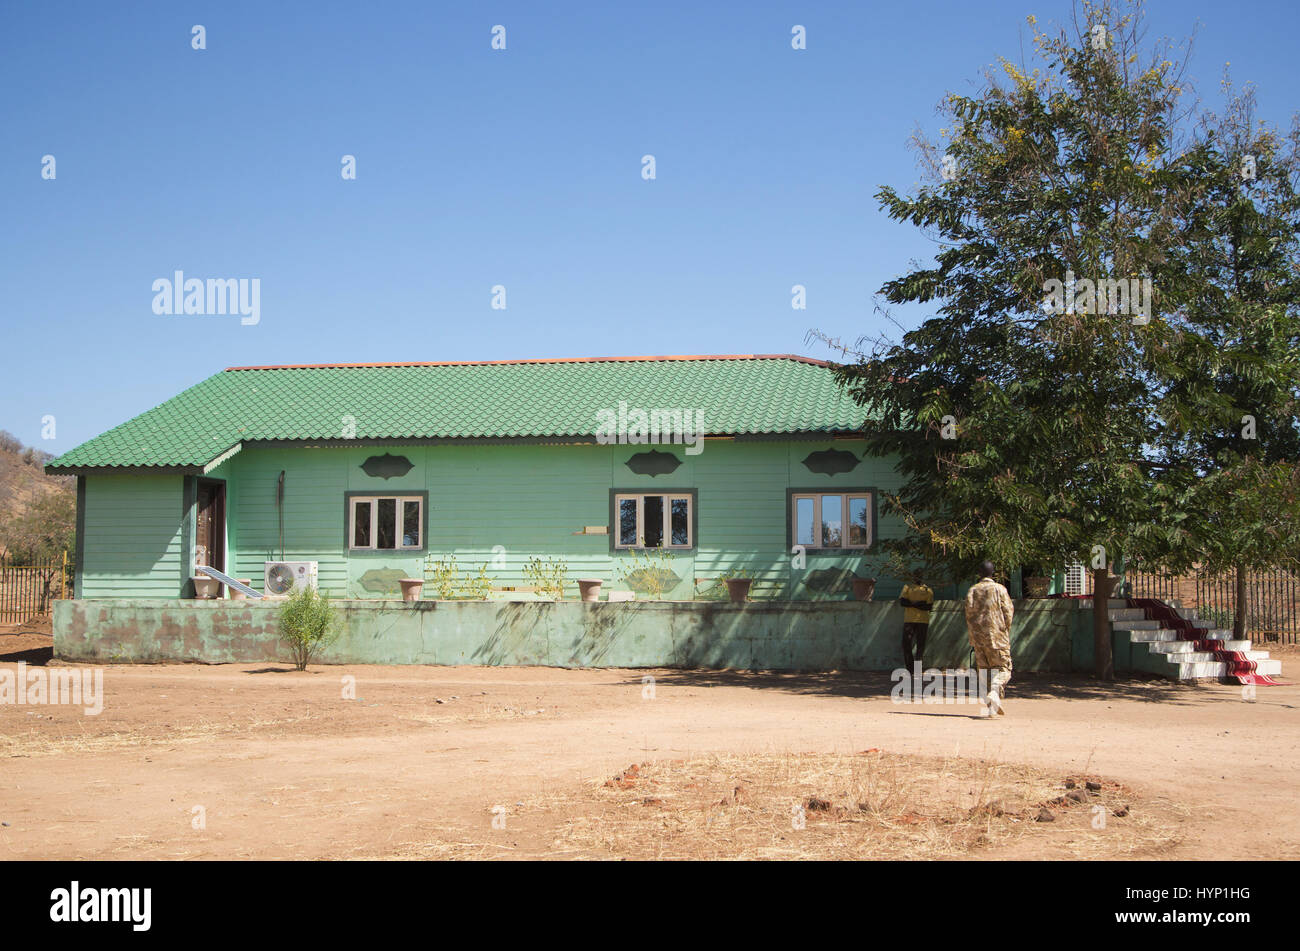 Kauda, Sudan. 21st Feb, 2017. The government building of the Sudan People's Liberation Movement-North (SPLM-N) in Kauda, Sudan, 21 February 2017. Kauda is the capital of an area in the Nuba mountains controlled by rebels from the national liberation army Sudan People's Liberation Army-North (SPLA-N). The Sudan People's Liberation Movement-North is its political arm. Photo: Laura Wagenknecht/dpa/Alamy Live News Stock Photo